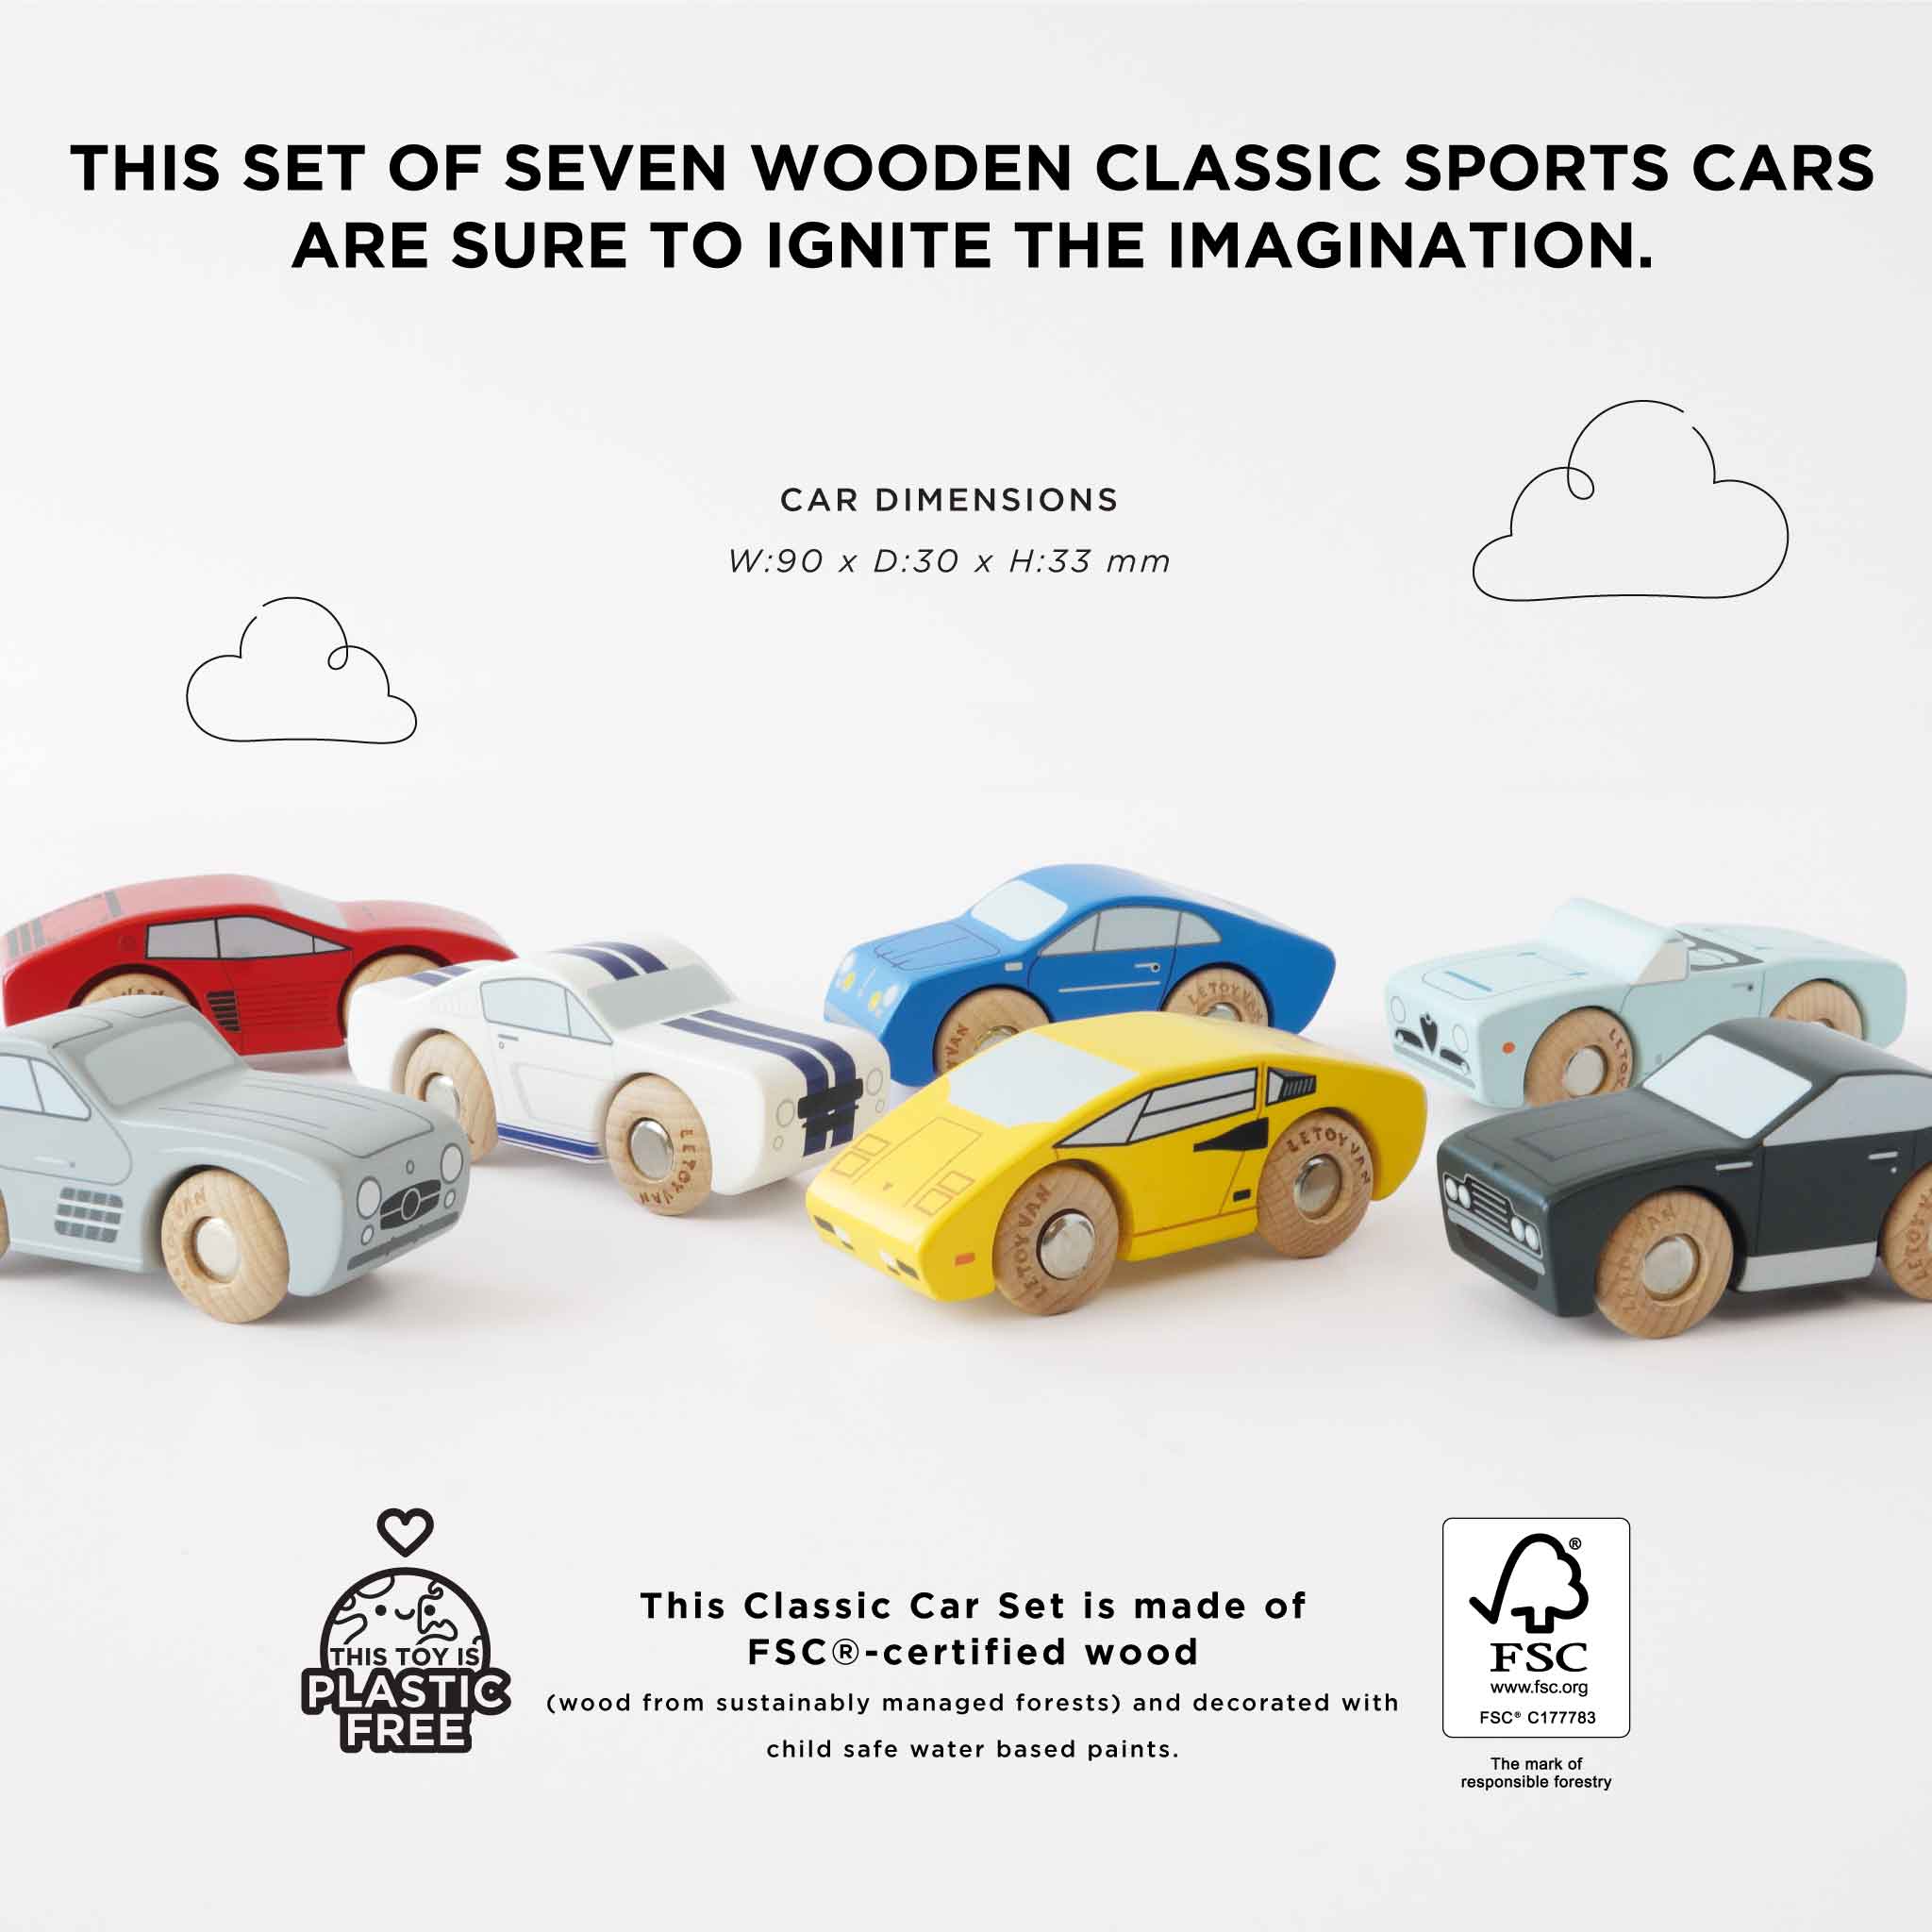 Classic Wooden Sports Cars